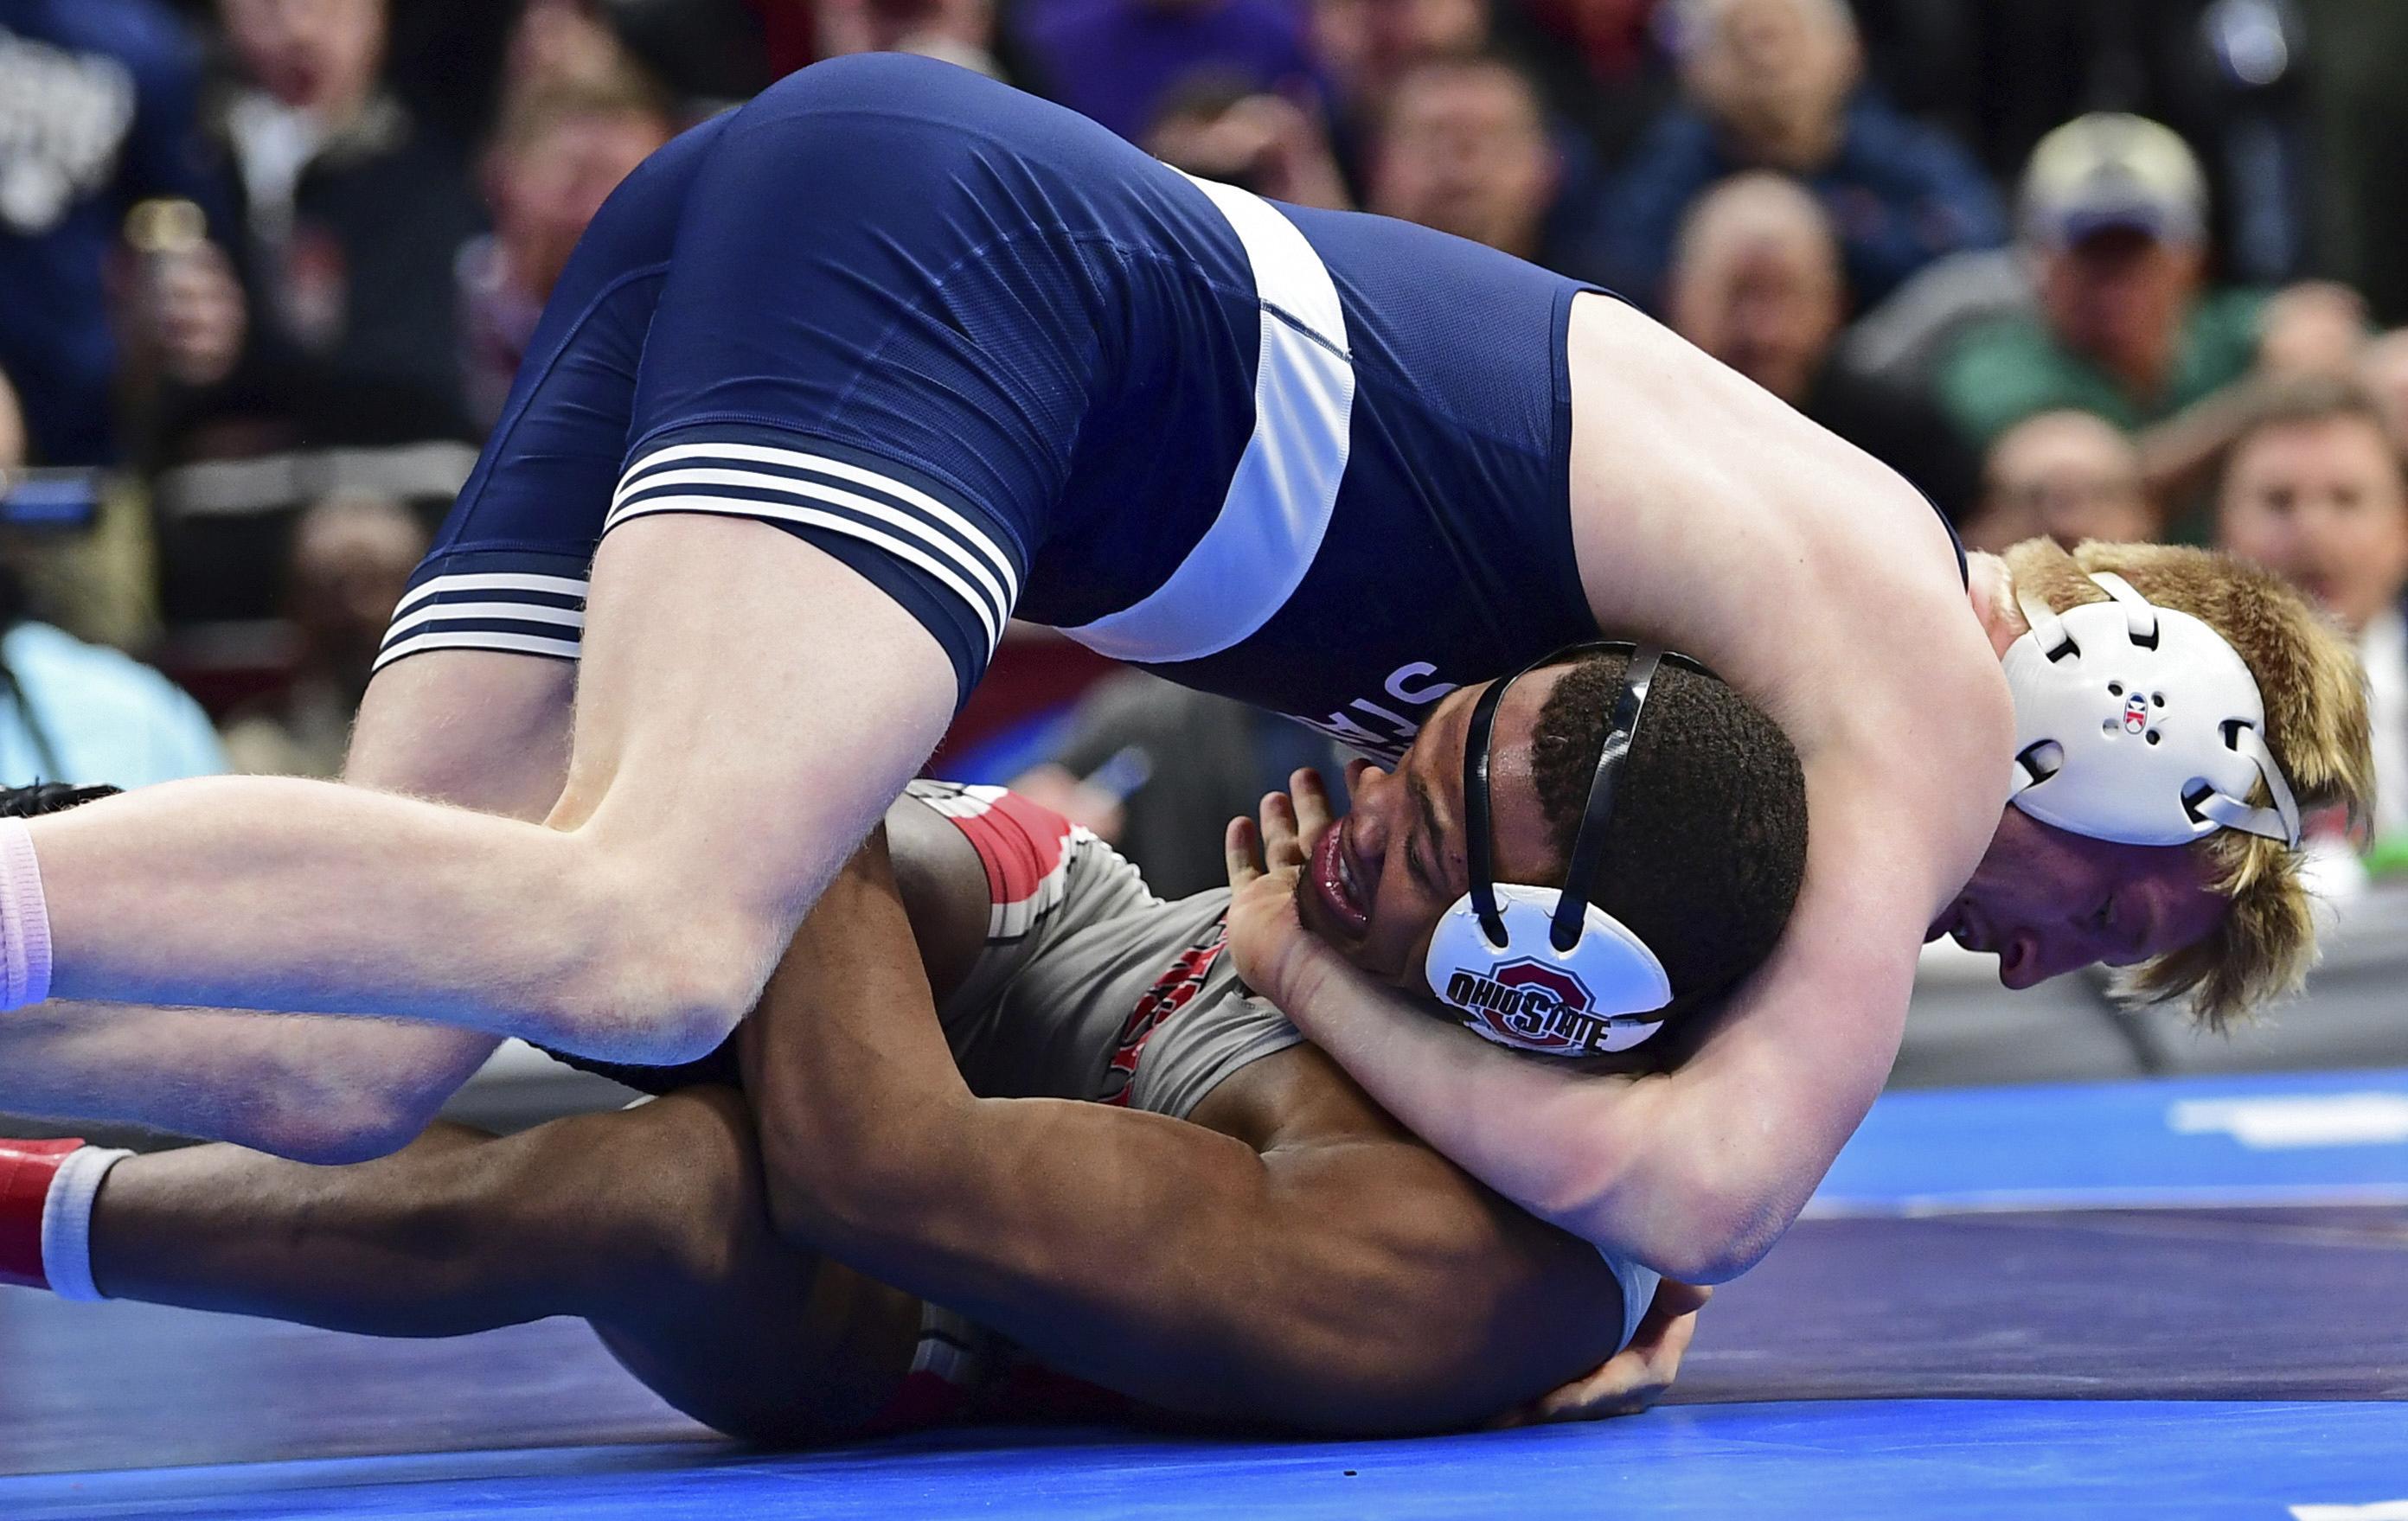 Bo Nickal's pin clinches wrestling championship for Penn State | The ...